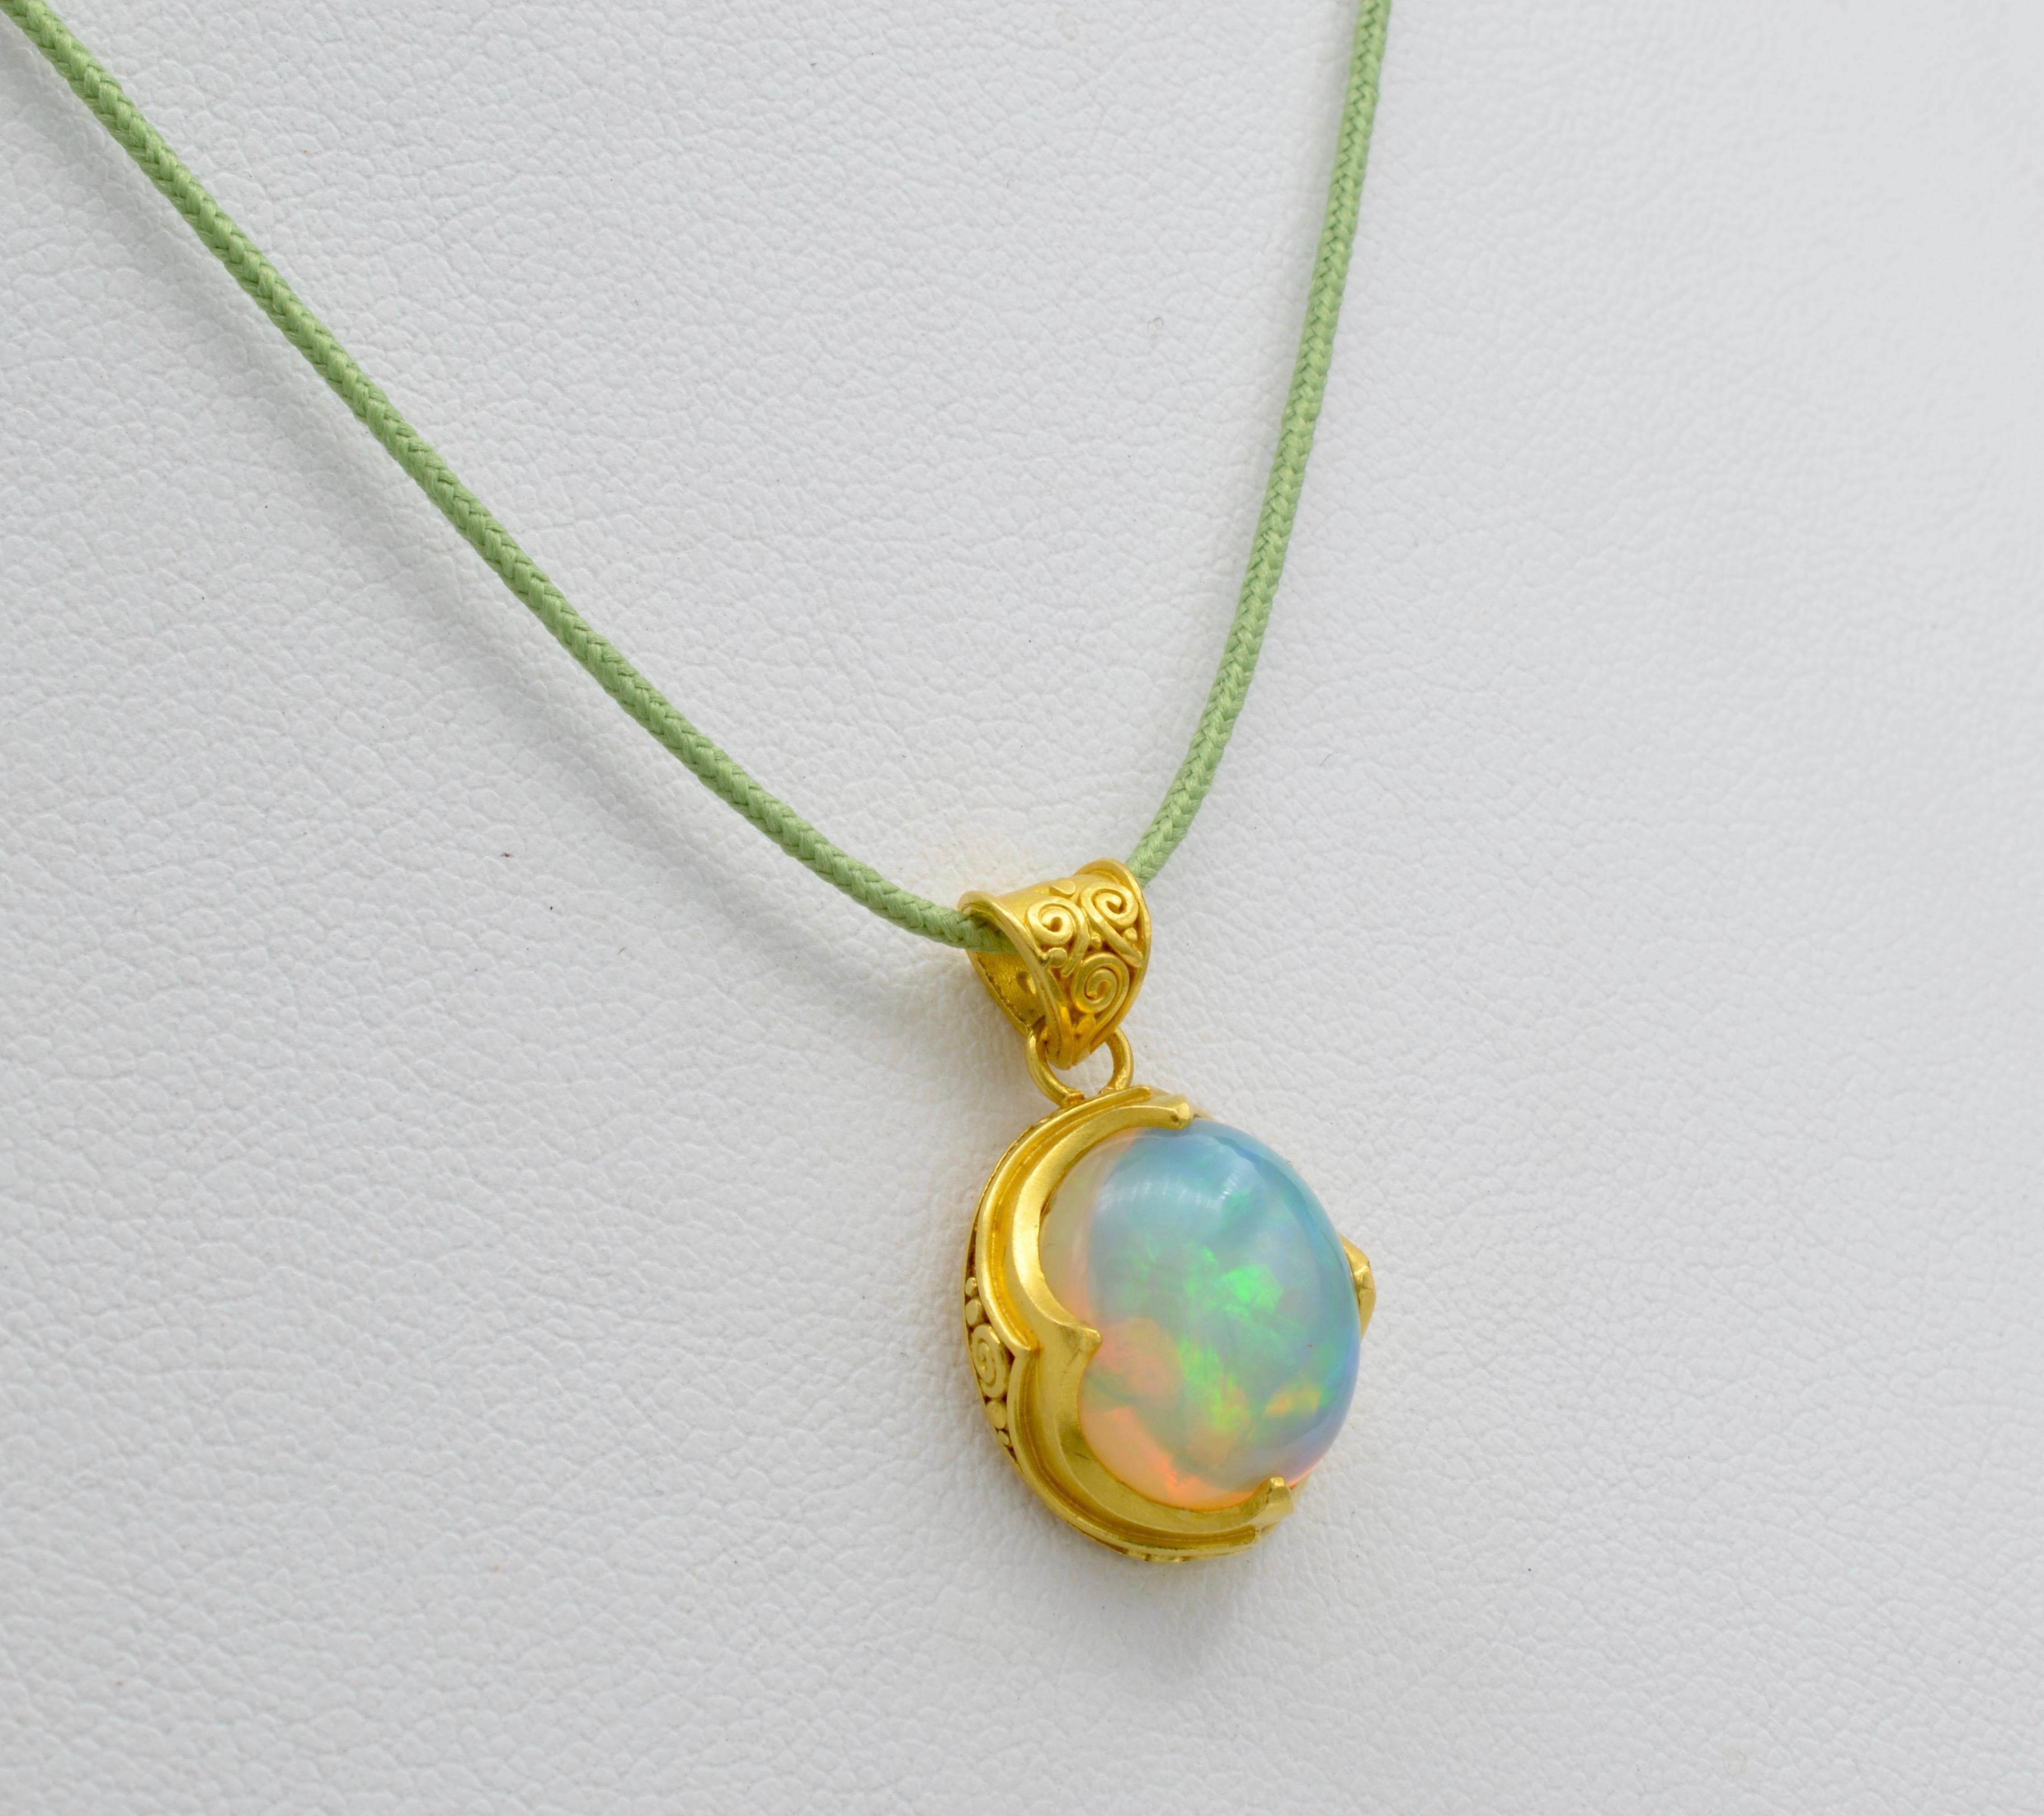 This yummy opal is vibrant in rainbow colors and brilliant light. The opal is aprox 5.5 ct and is surrounded by  a 22k gold bezel to offset the dazzle of this amazing stone. The pendant is send on a cotton cord and can be put on a chain of your